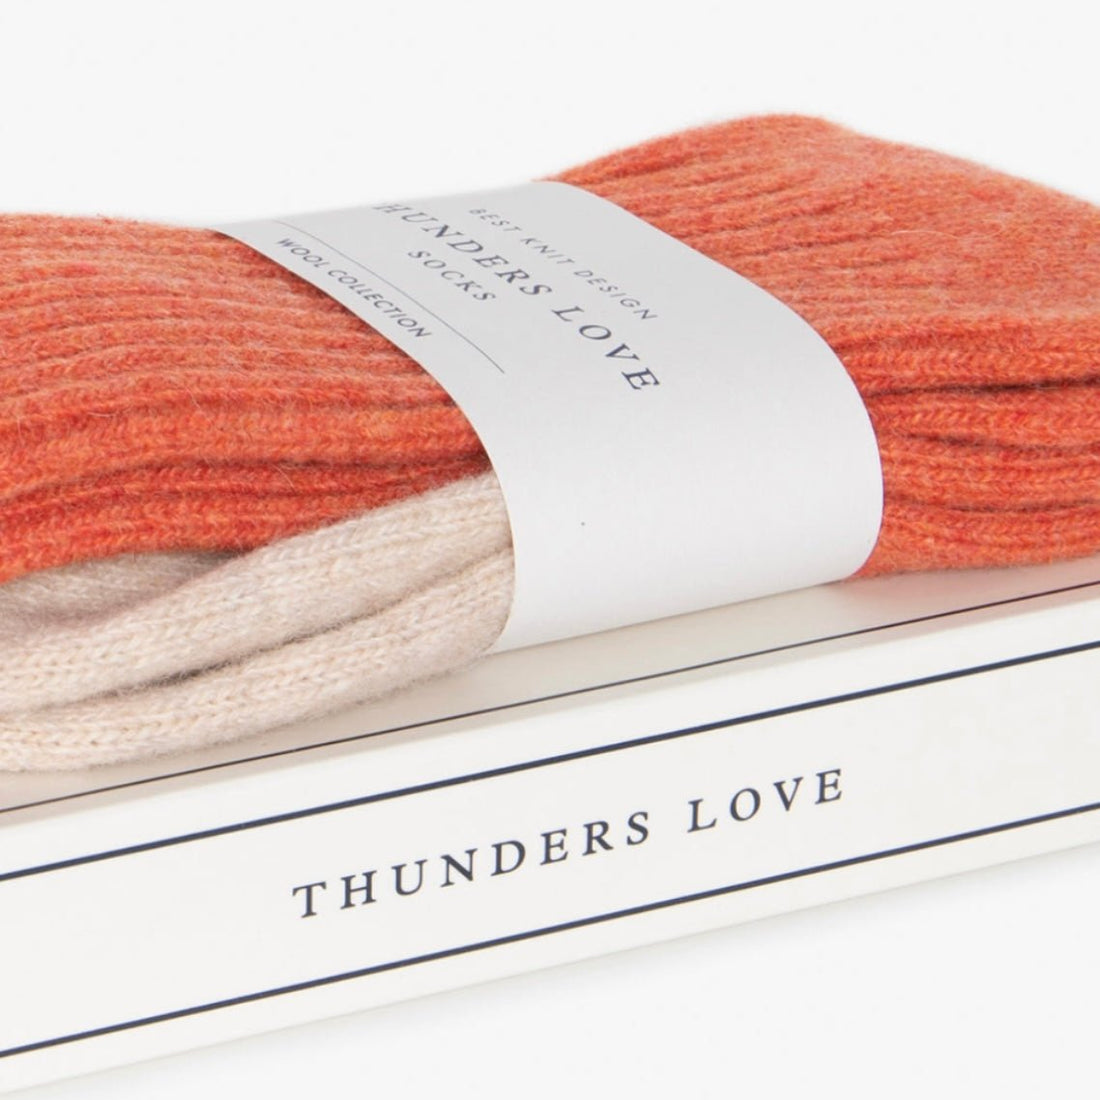 Thunders Love Socks - Wool Collection, Vintage Orange - The Flower Crate